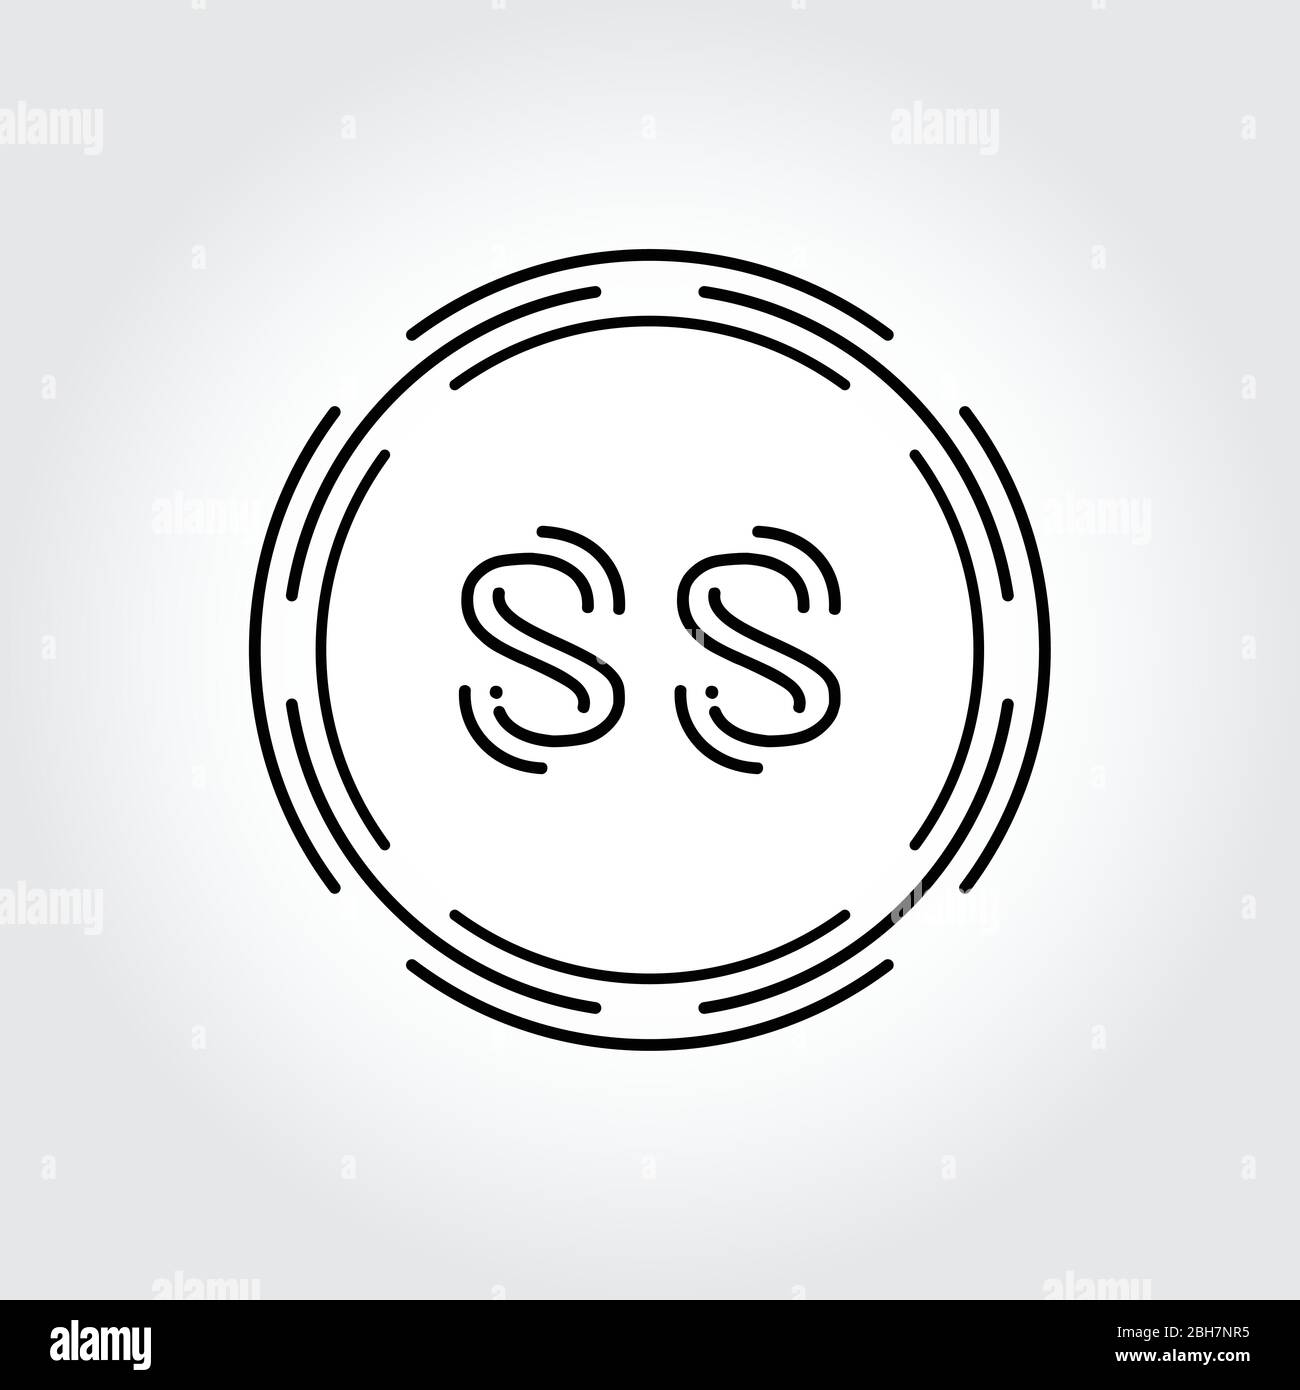 Initial SS Logo Design Creative Typography Vector Template ...